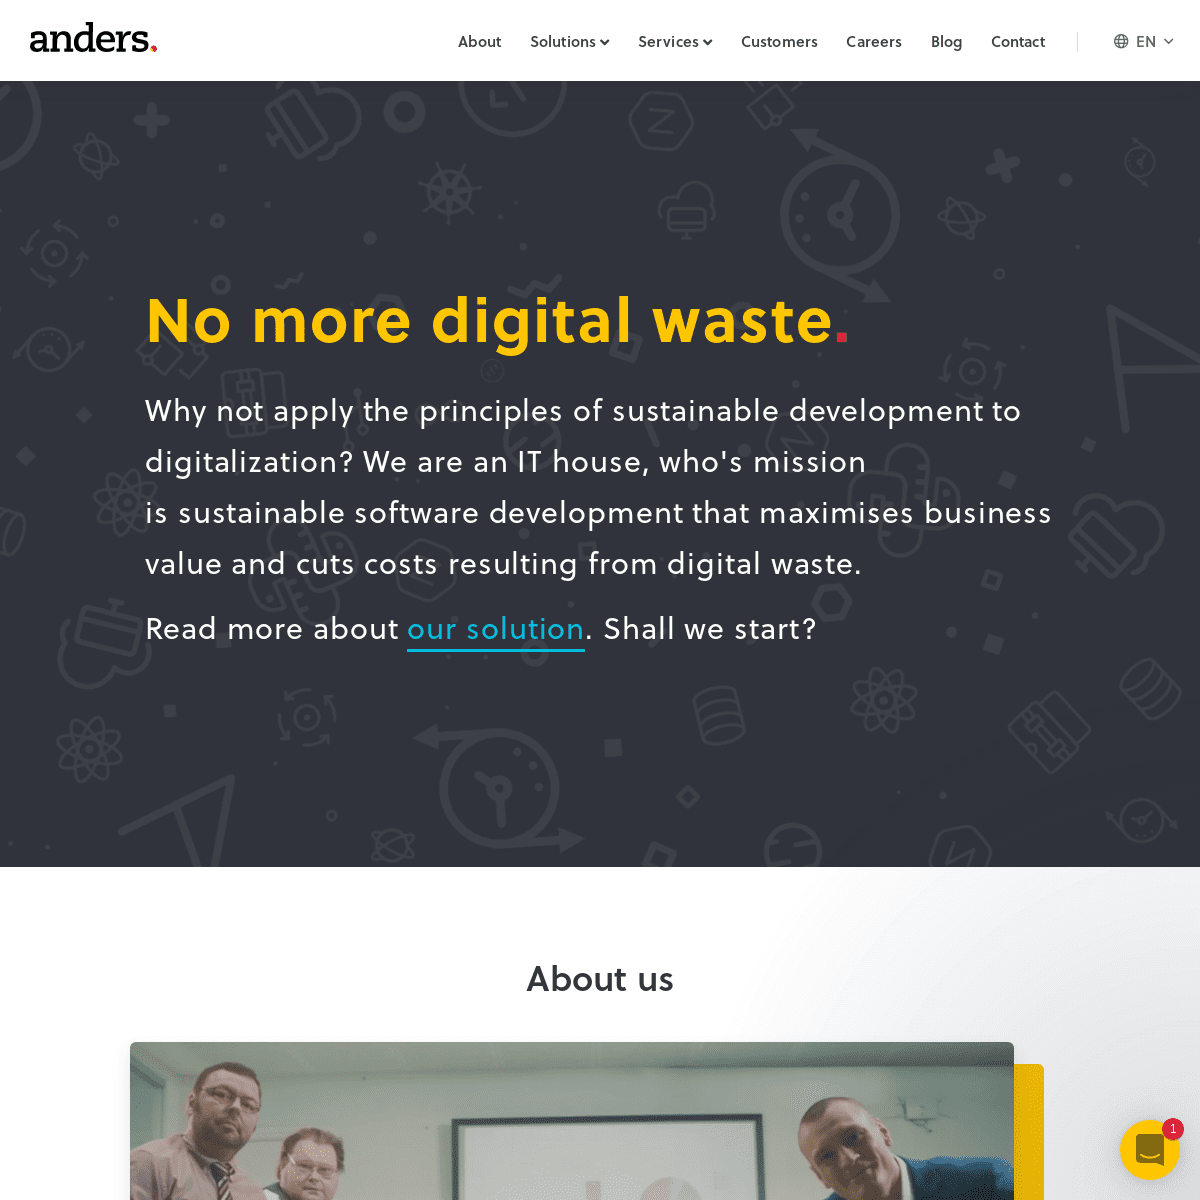 A complete backup of anders.com